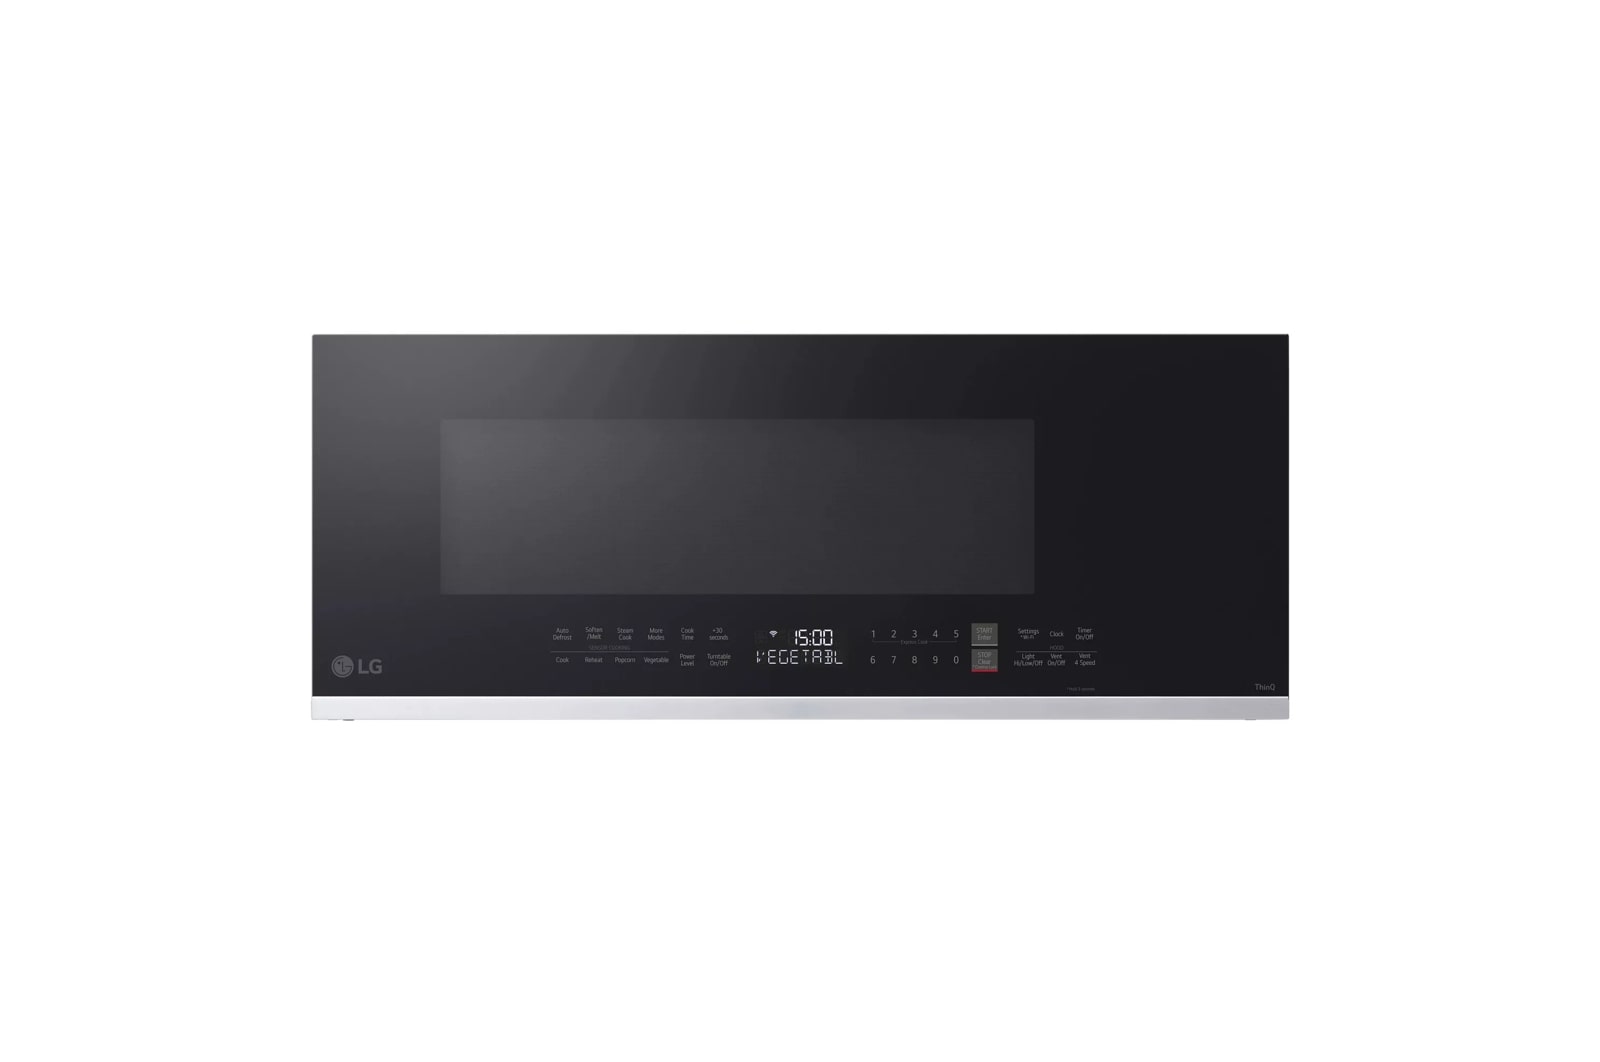 Lg 1.3 cu. ft. Smart Low Profile Over-the-Range Microwave Oven with Sensor Cook